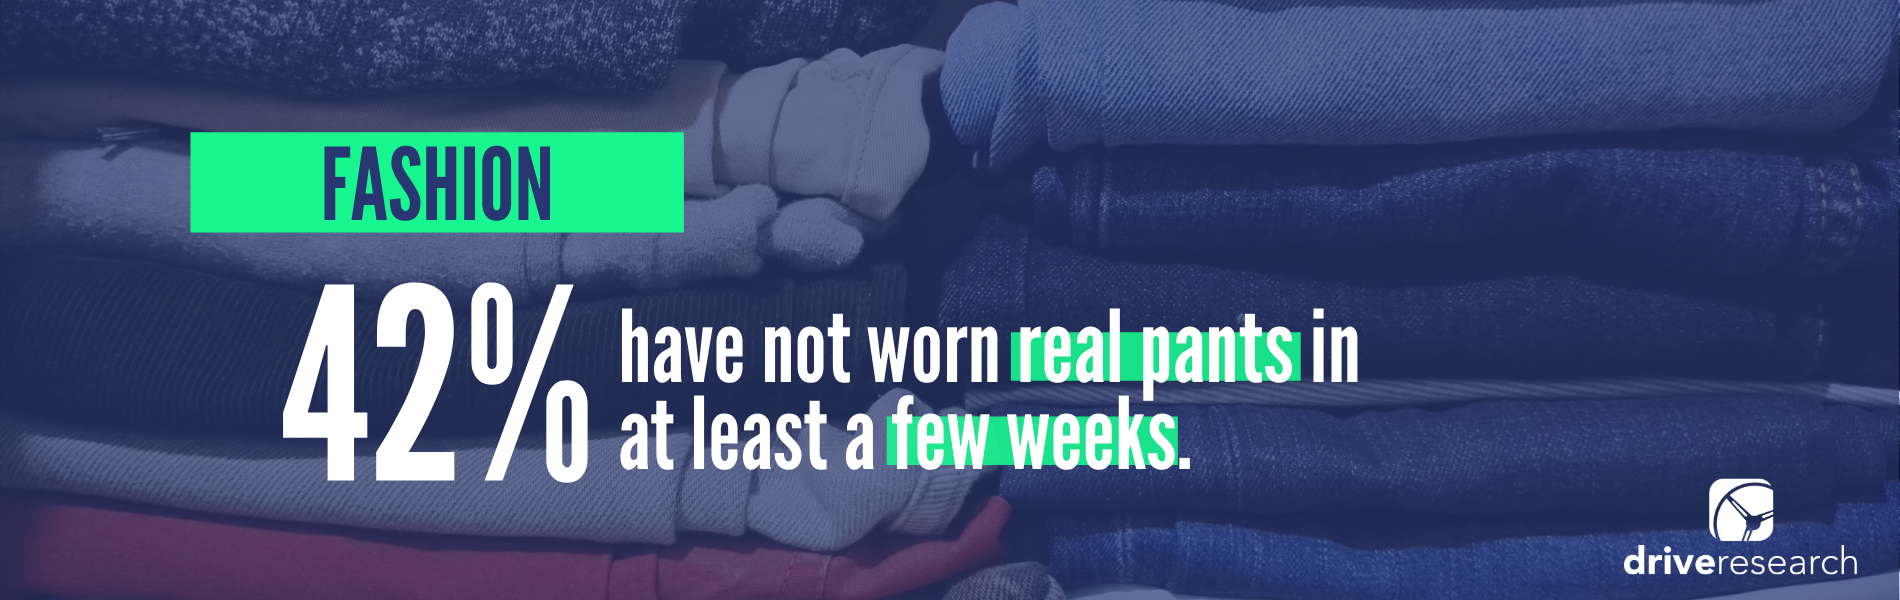 quarantine survey-Nearly half (42%) have not worn real pants in at least a few weeks.